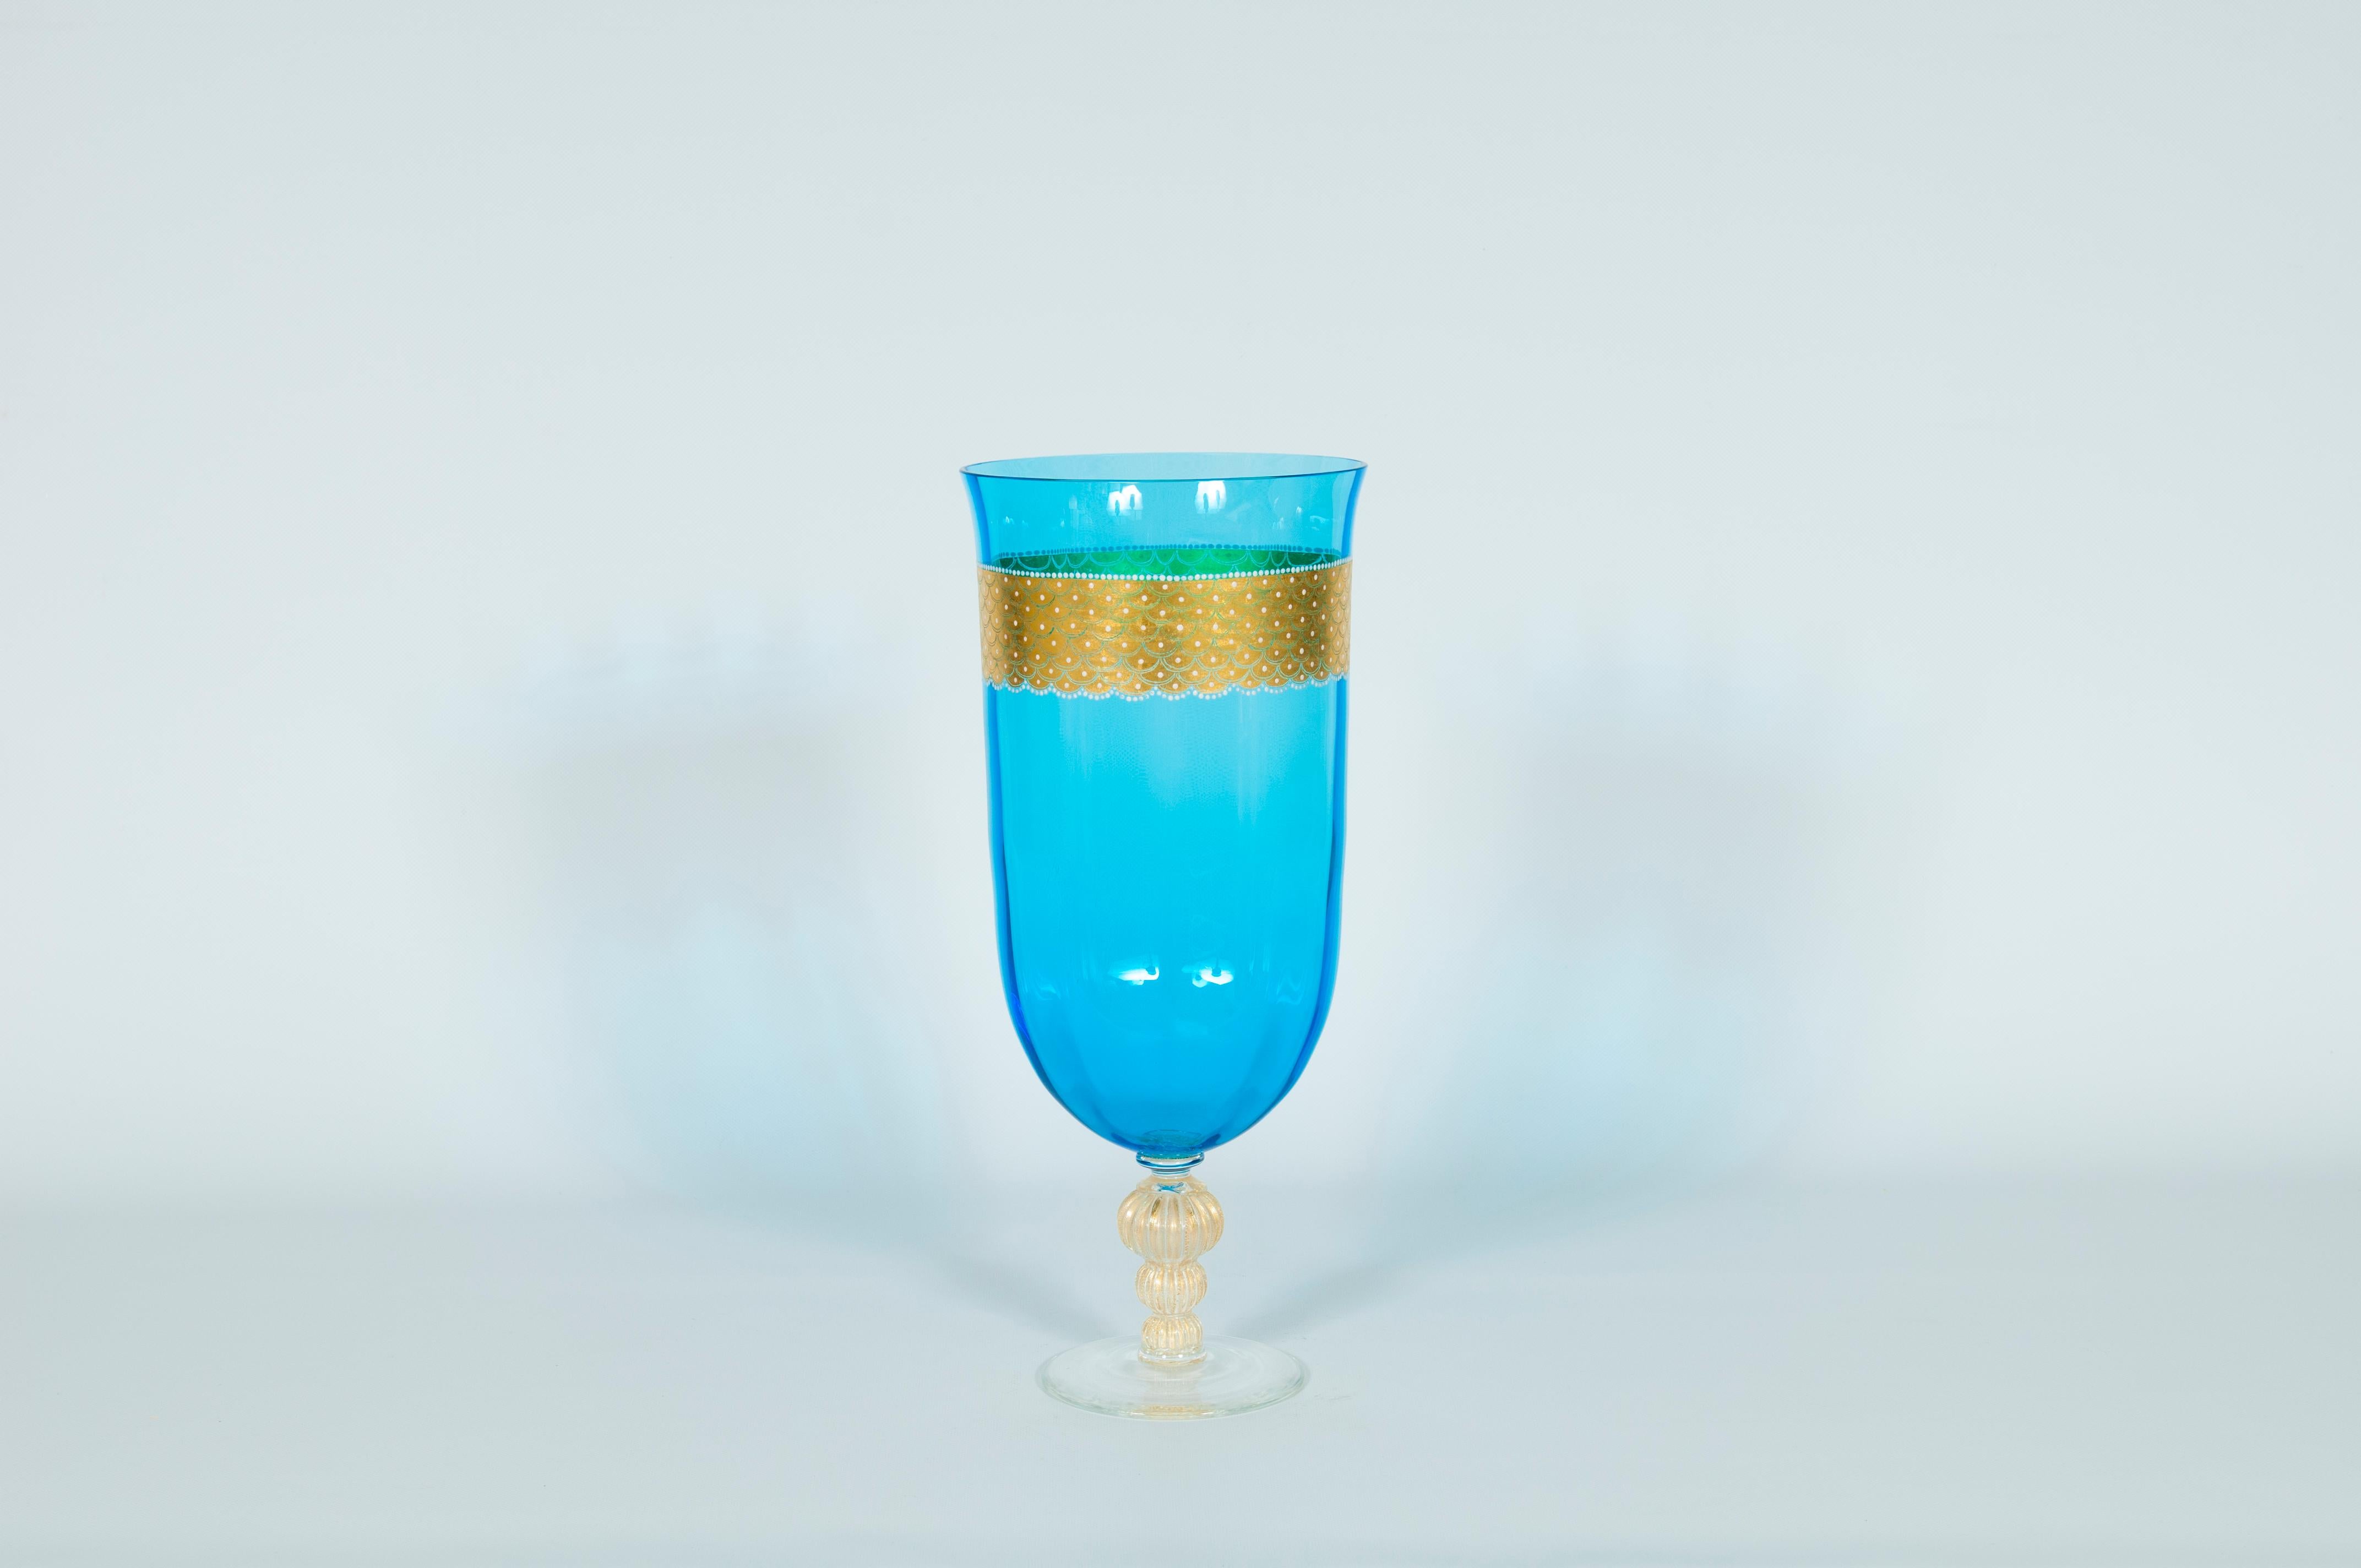 Italian Mid-Century Modern Murano Stemware Glass with Gold Finishes, Blue Color, Italy